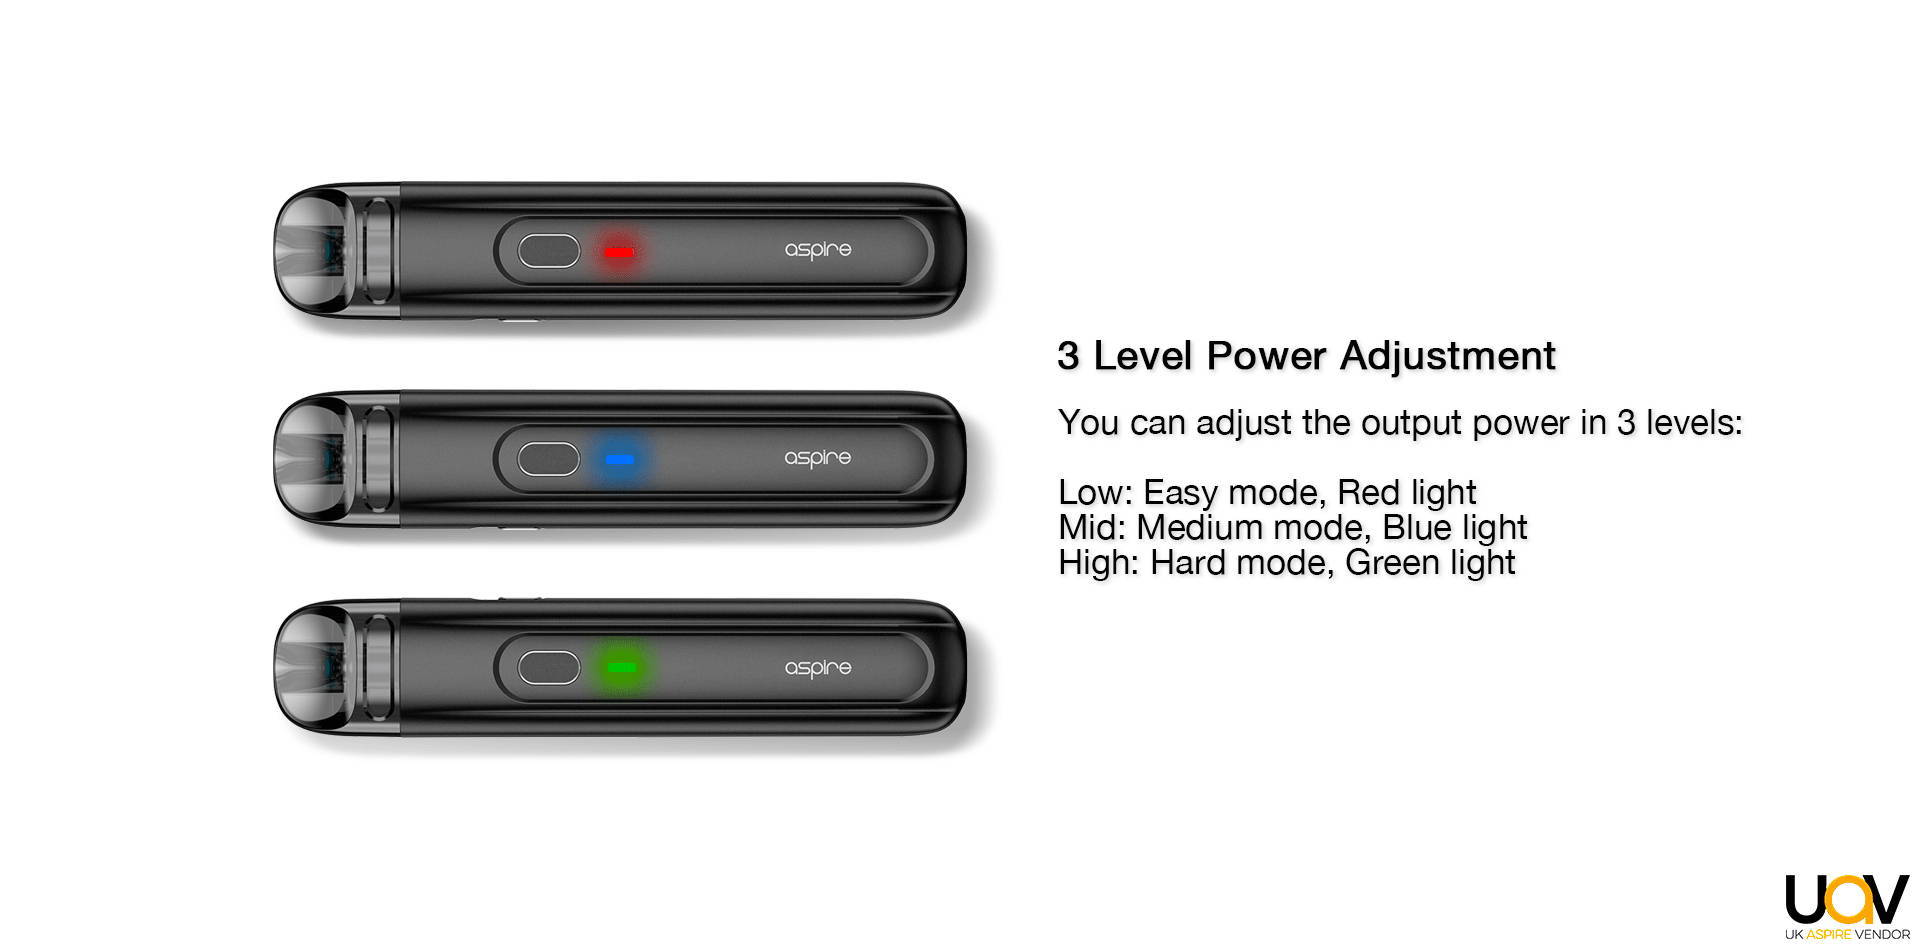 You can adjust the output power in 3 levels:    Low: Easy mode, Red light  Mid: Medium mode, Blue light  High: Hard mode, Green light